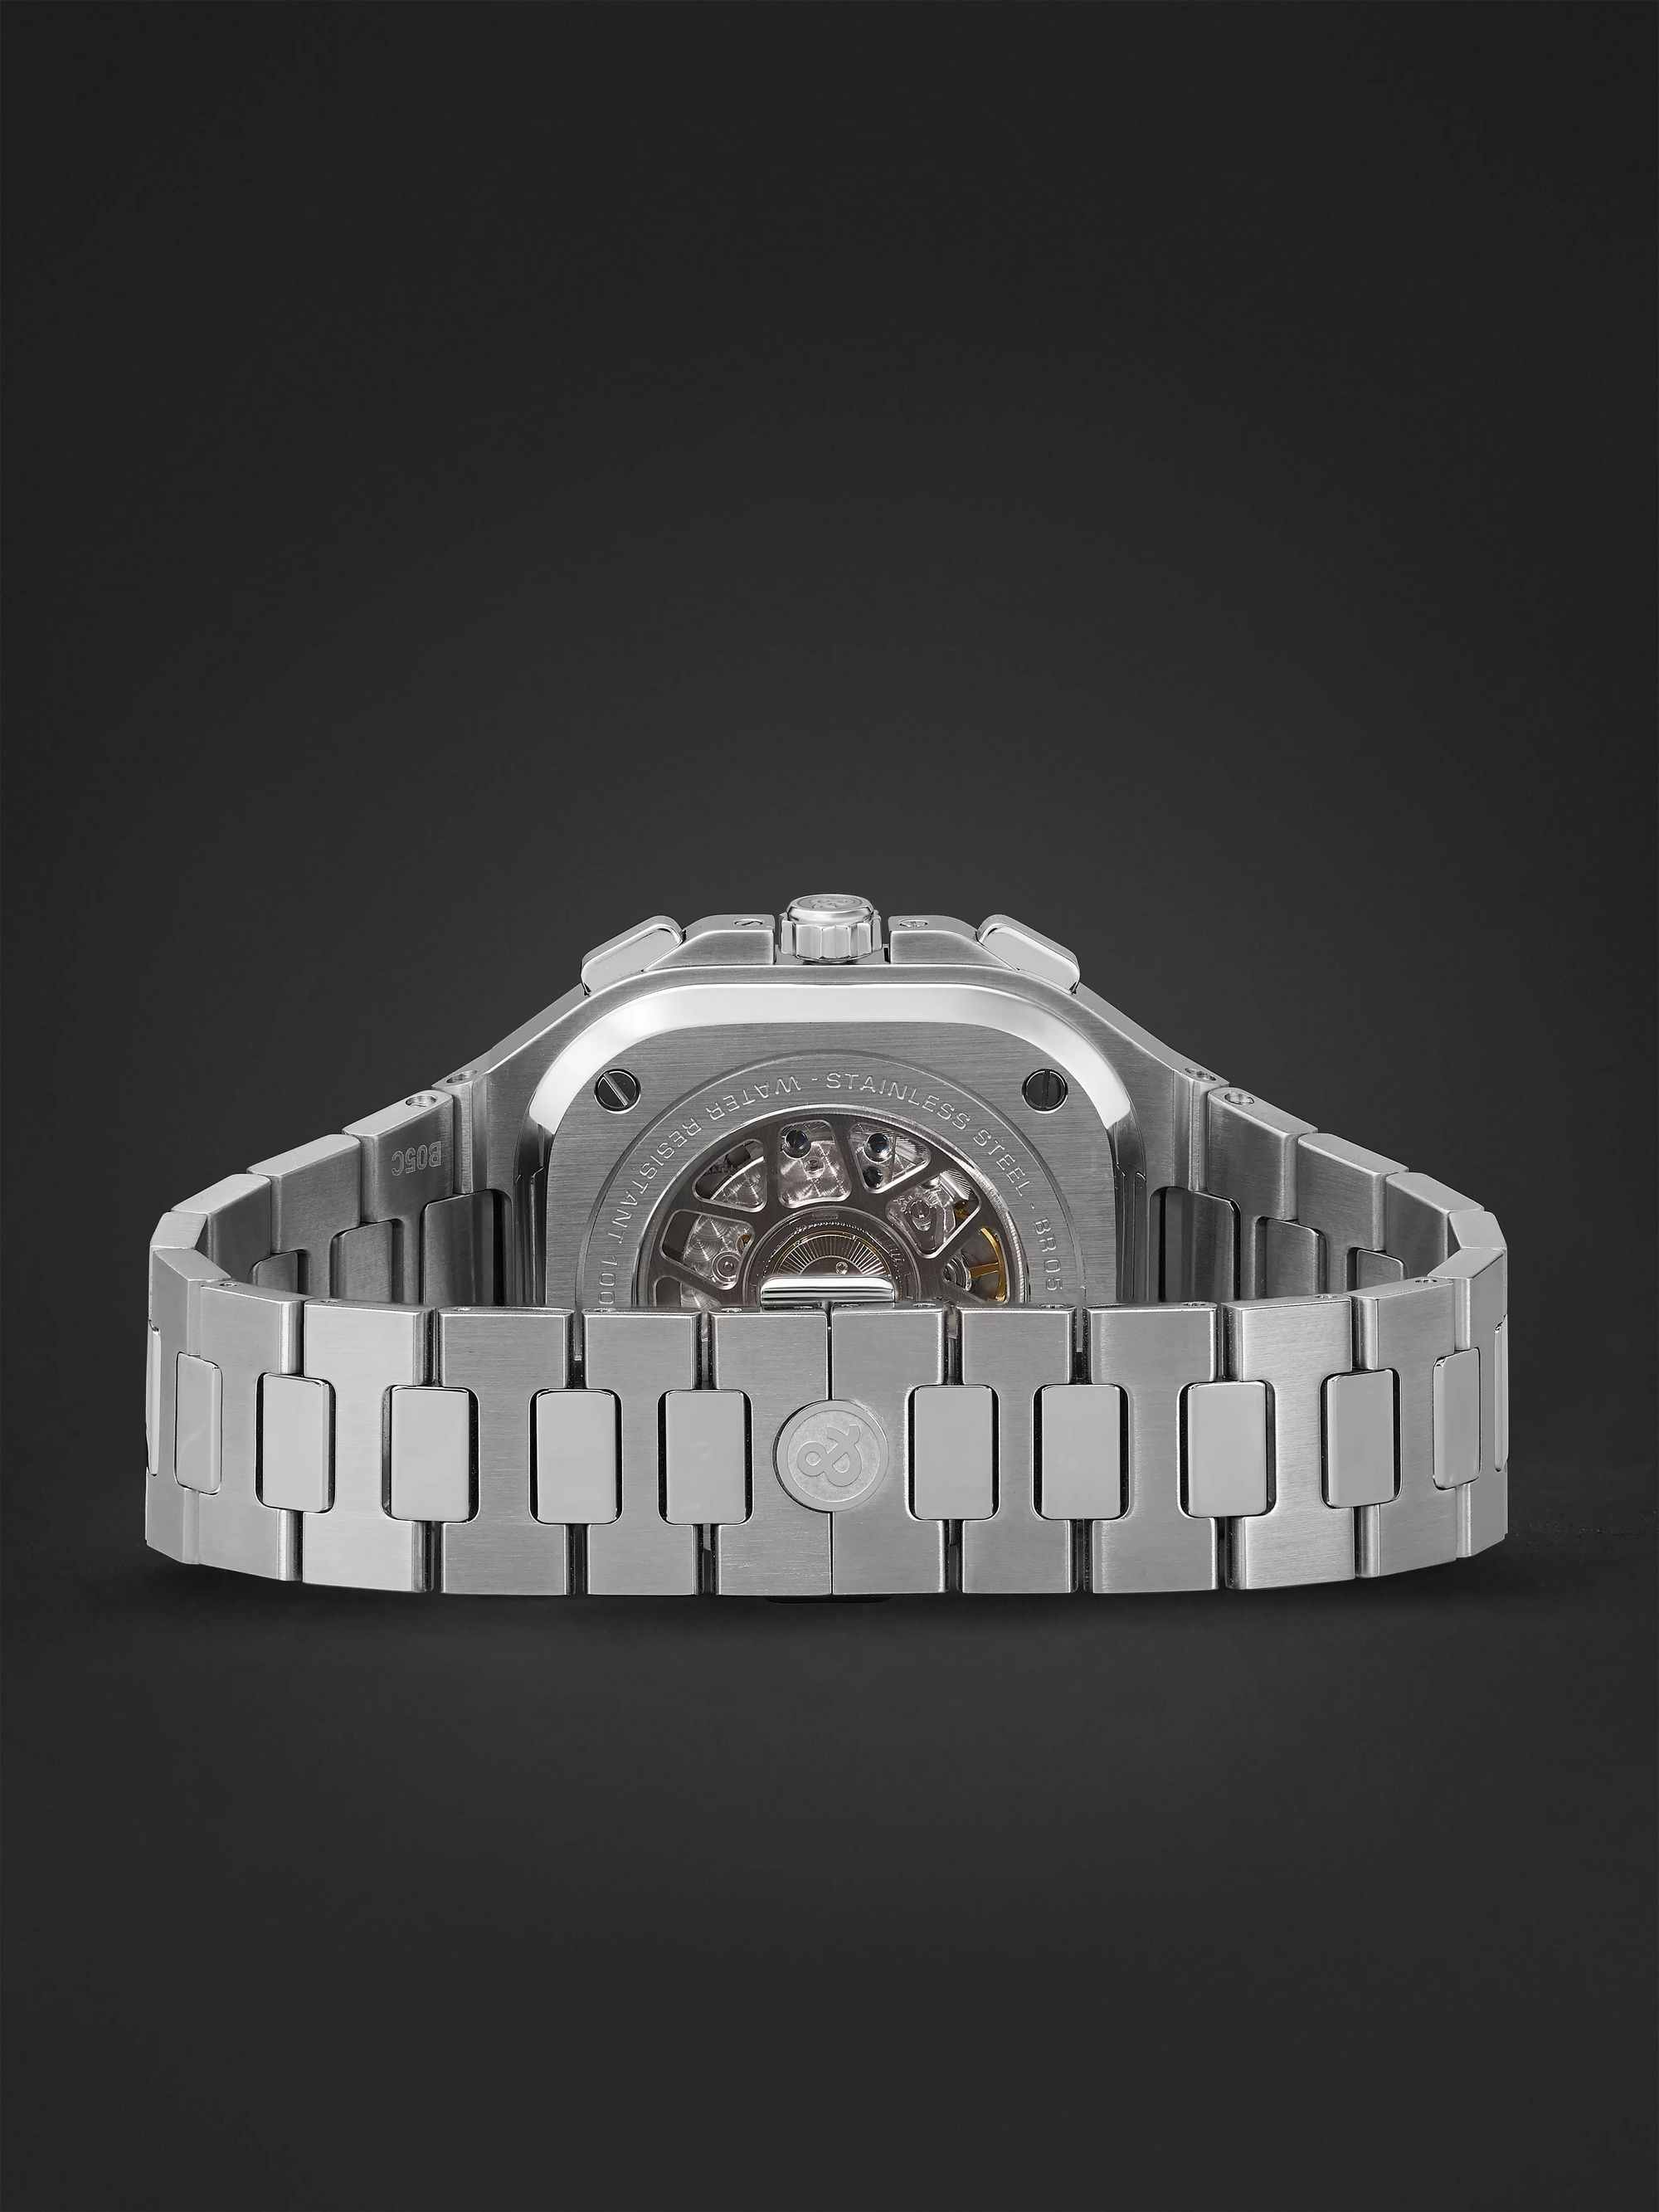 BELL & ROSS BR 05 Automatic Chronograph 42mm Stainless Steel Watch, Ref. No. BR05C-BU-ST/SST